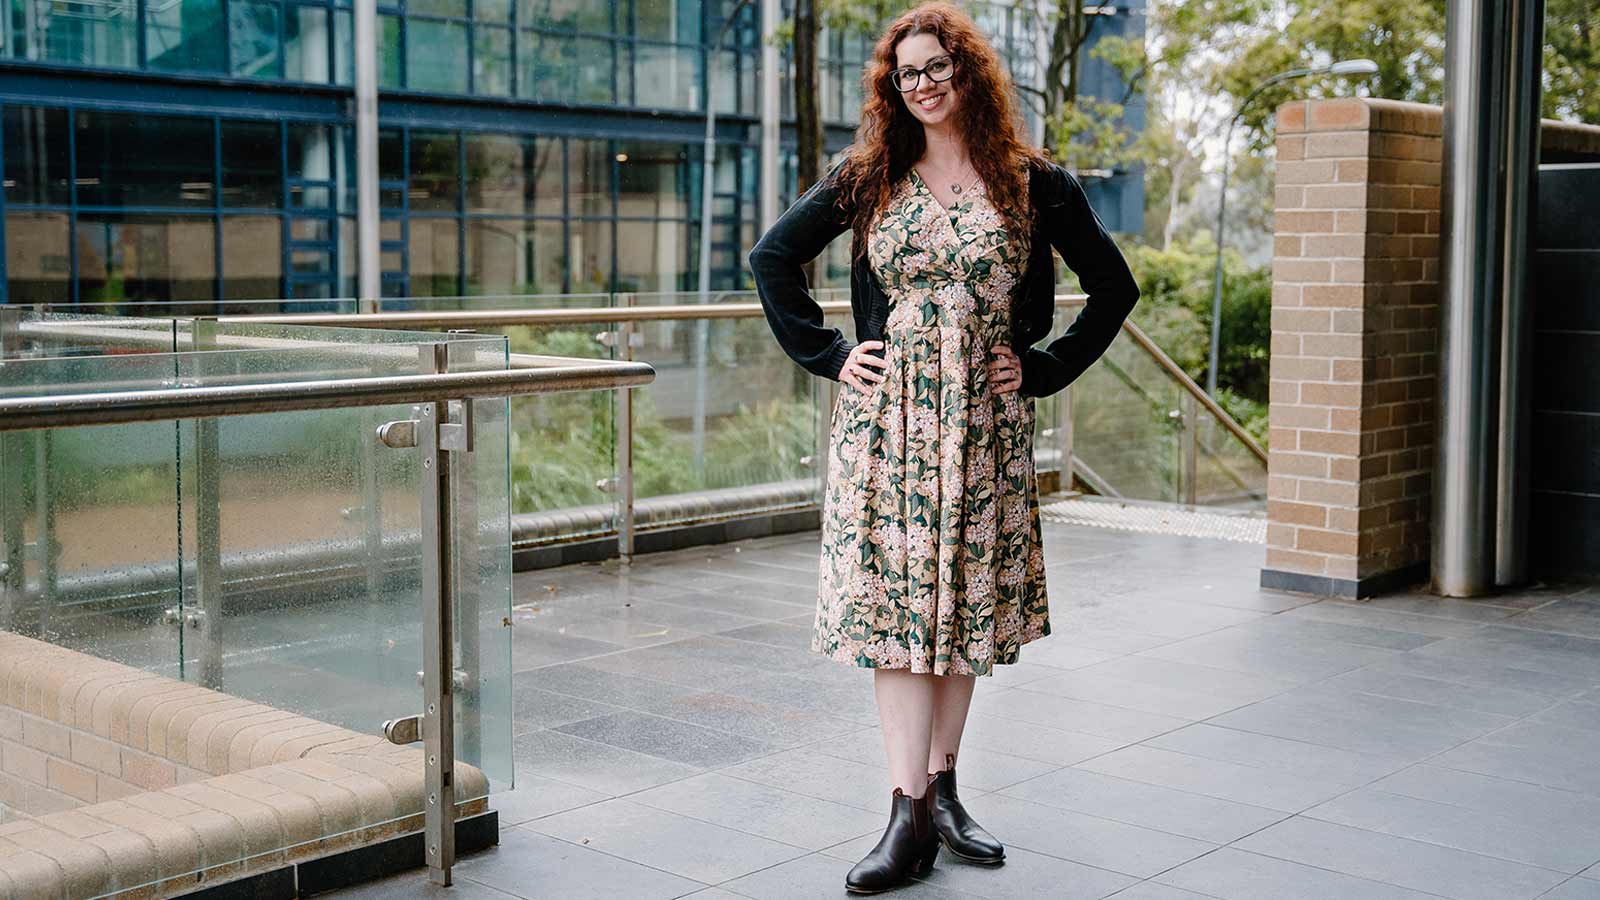 Molly Mackanzie is standing outside a building at UOW. She has pale skin and dark red hair and is wearing a floral dress, black cardigan and black boots.